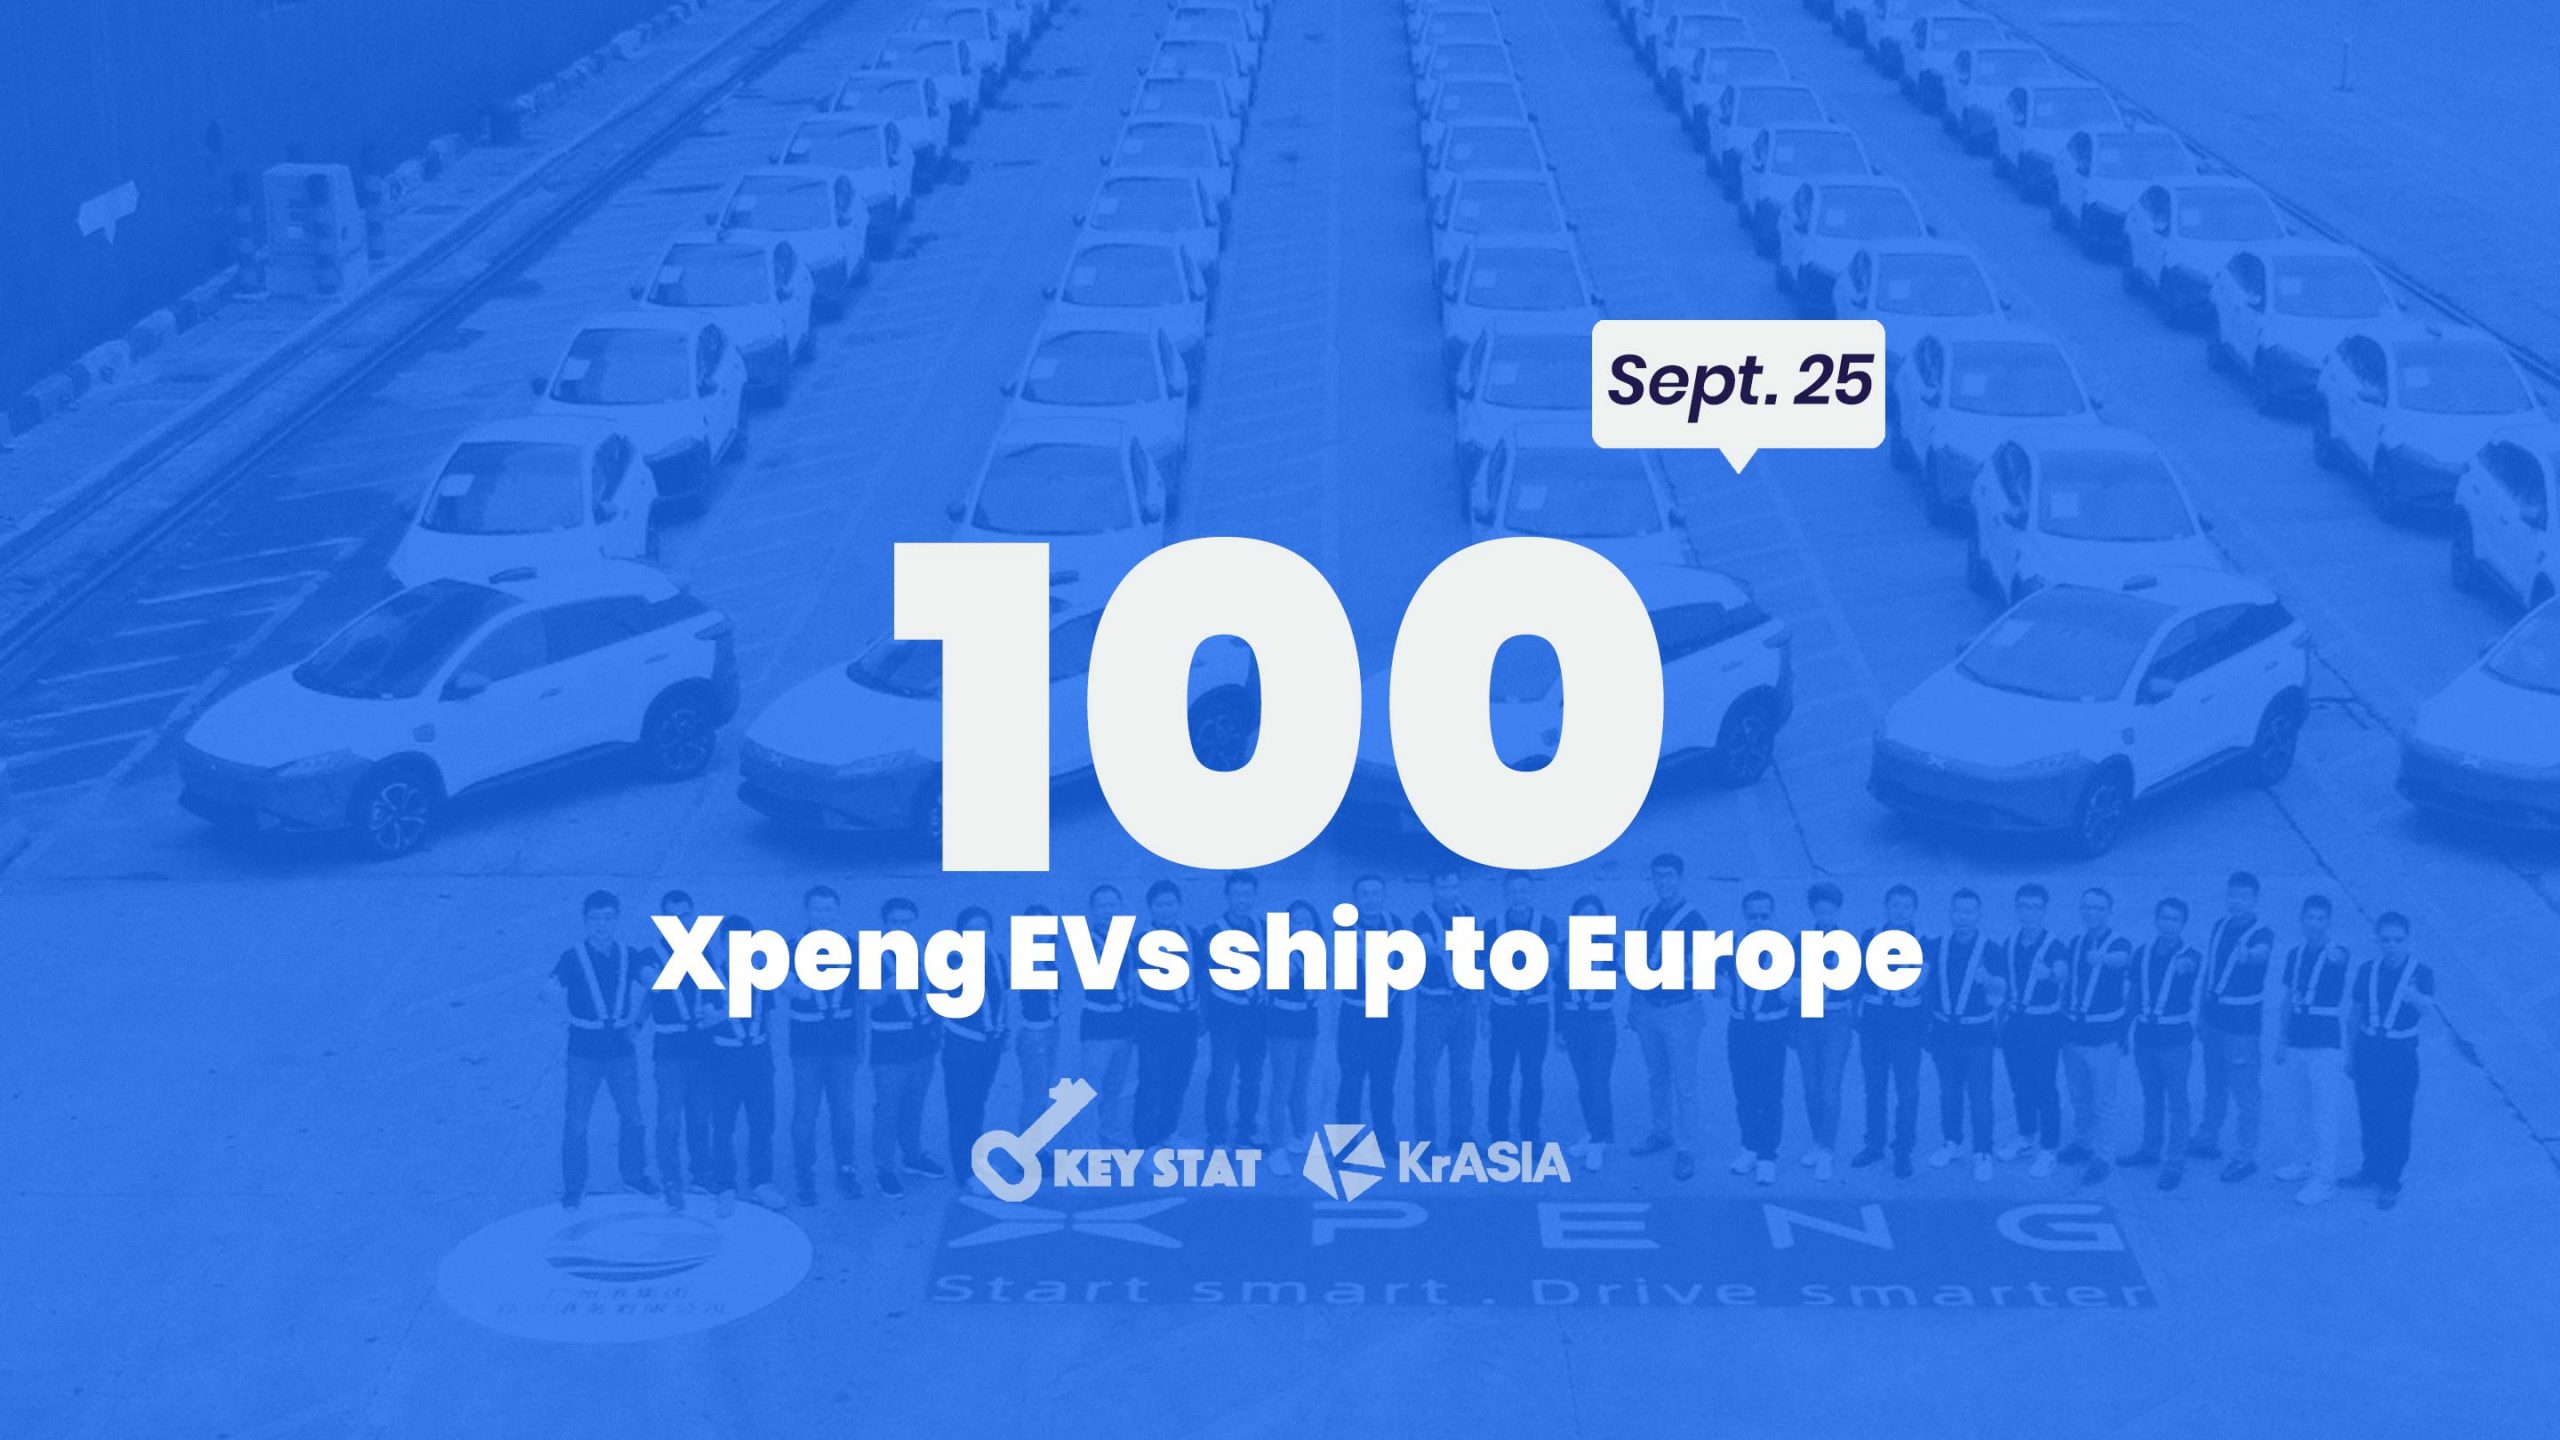 KEY STAT | Chinese EV maker Xpeng to deliver its first order from Europe